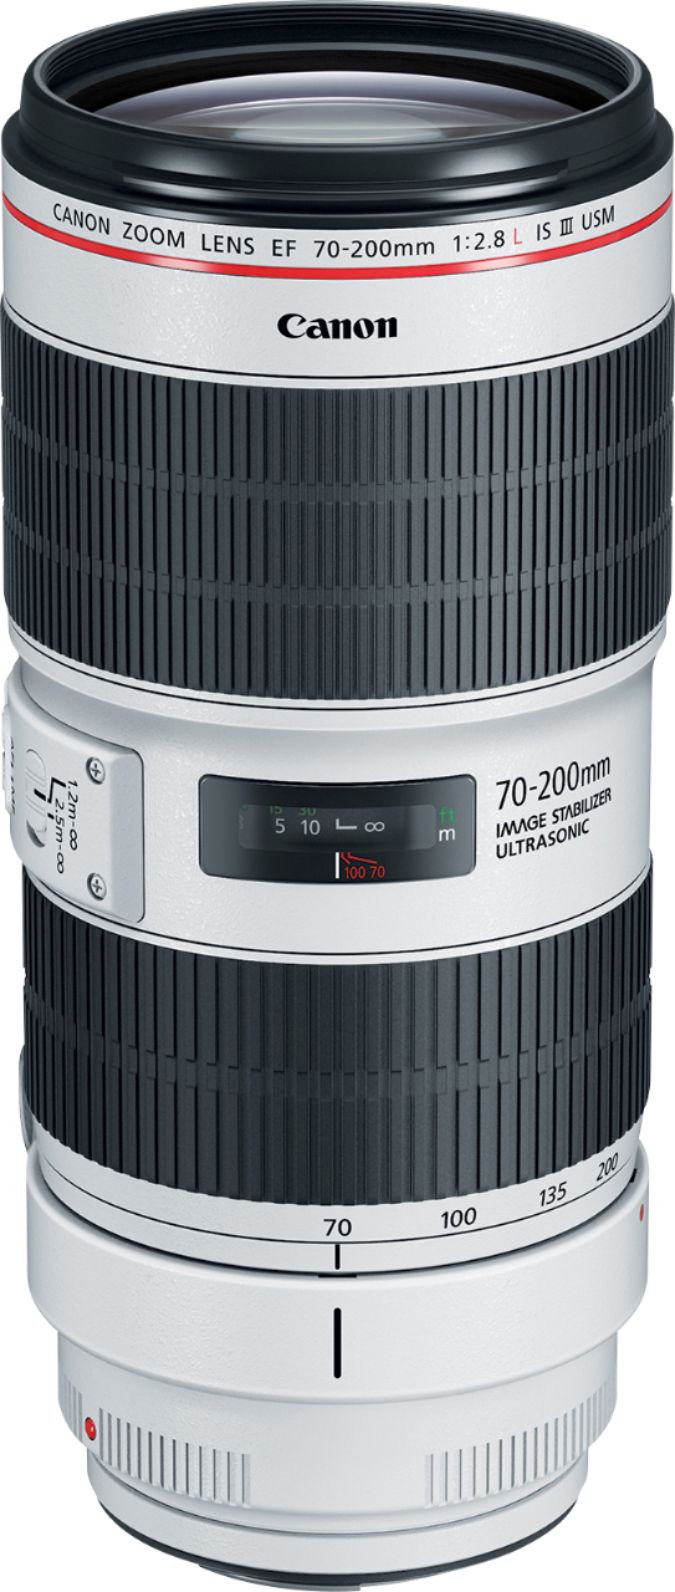 Canon EF 70-200mm f/2.8L IS III USM Optical Telephoto Zoom Lens for DSLRs  3044C002 - Best Buy